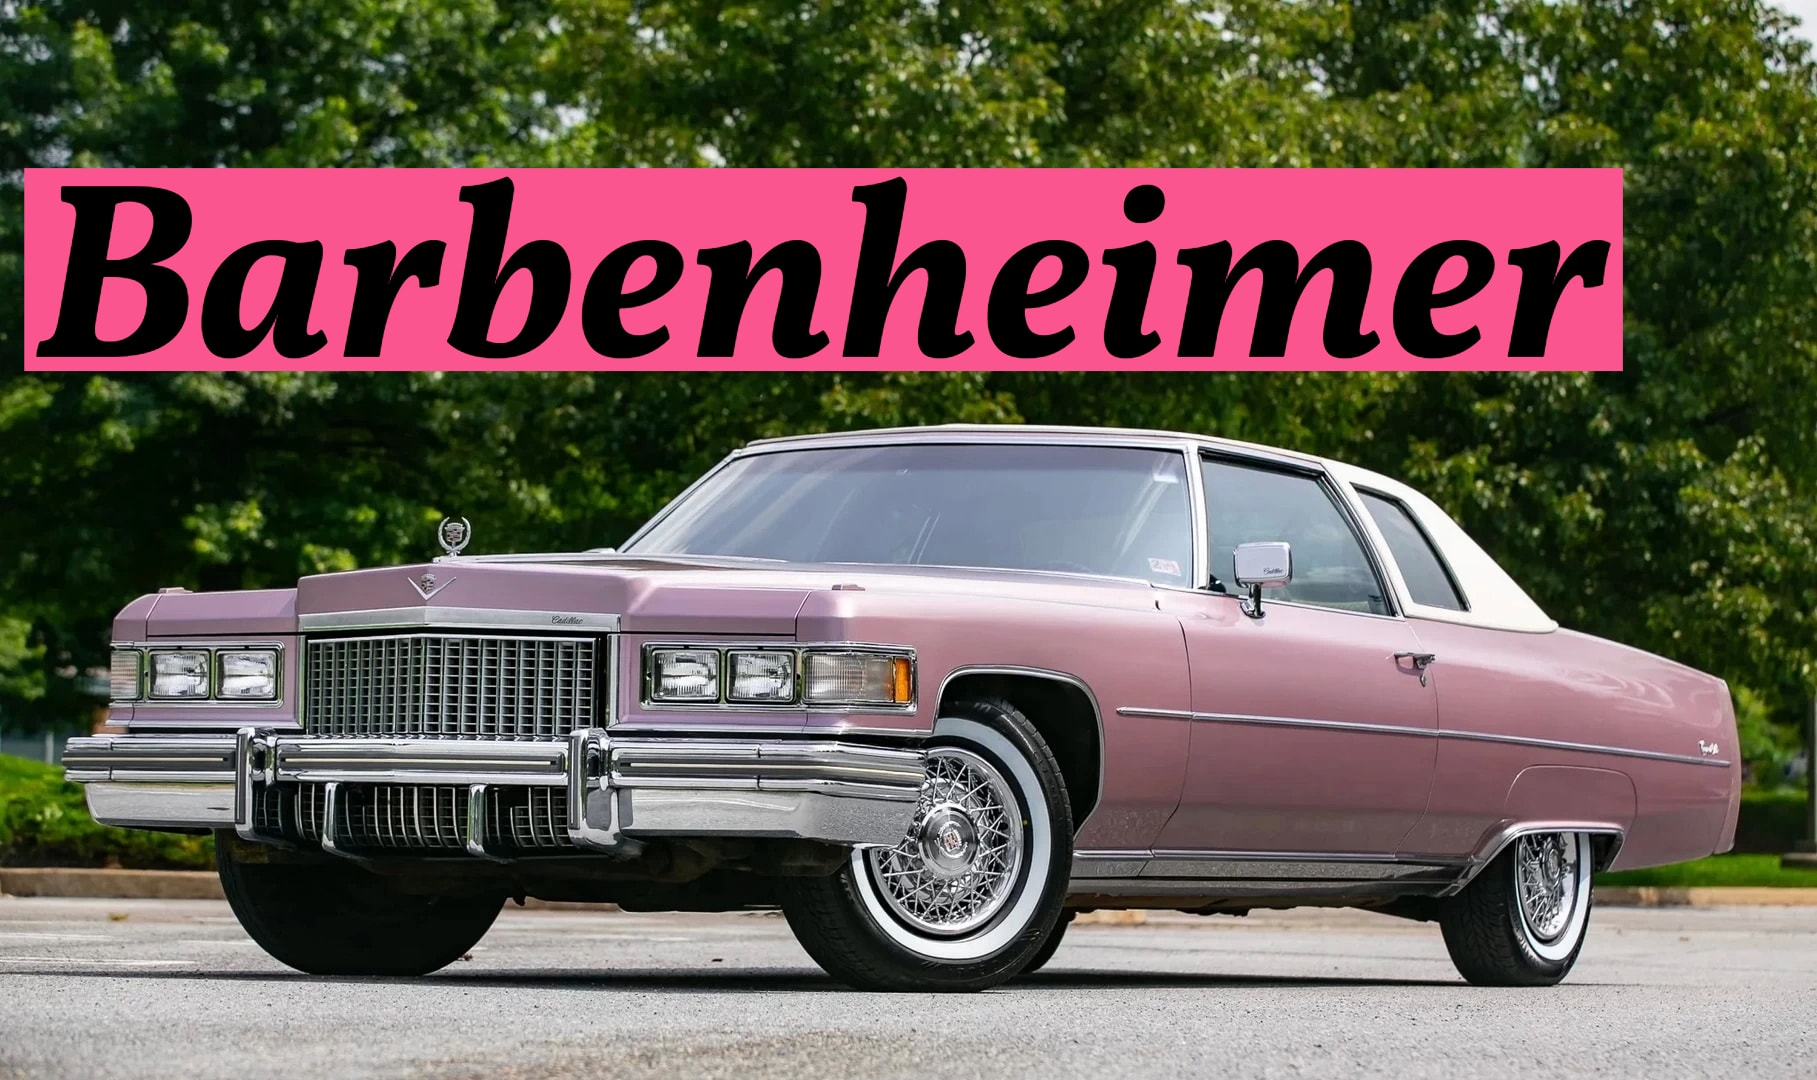 https://s1.cdn.autoevolution.com/images/news/this-pink-1975-cadillac-coupe-deville-is-what-barbie-would-drive-if-she-was-a-mobster-219947_1.jpeg